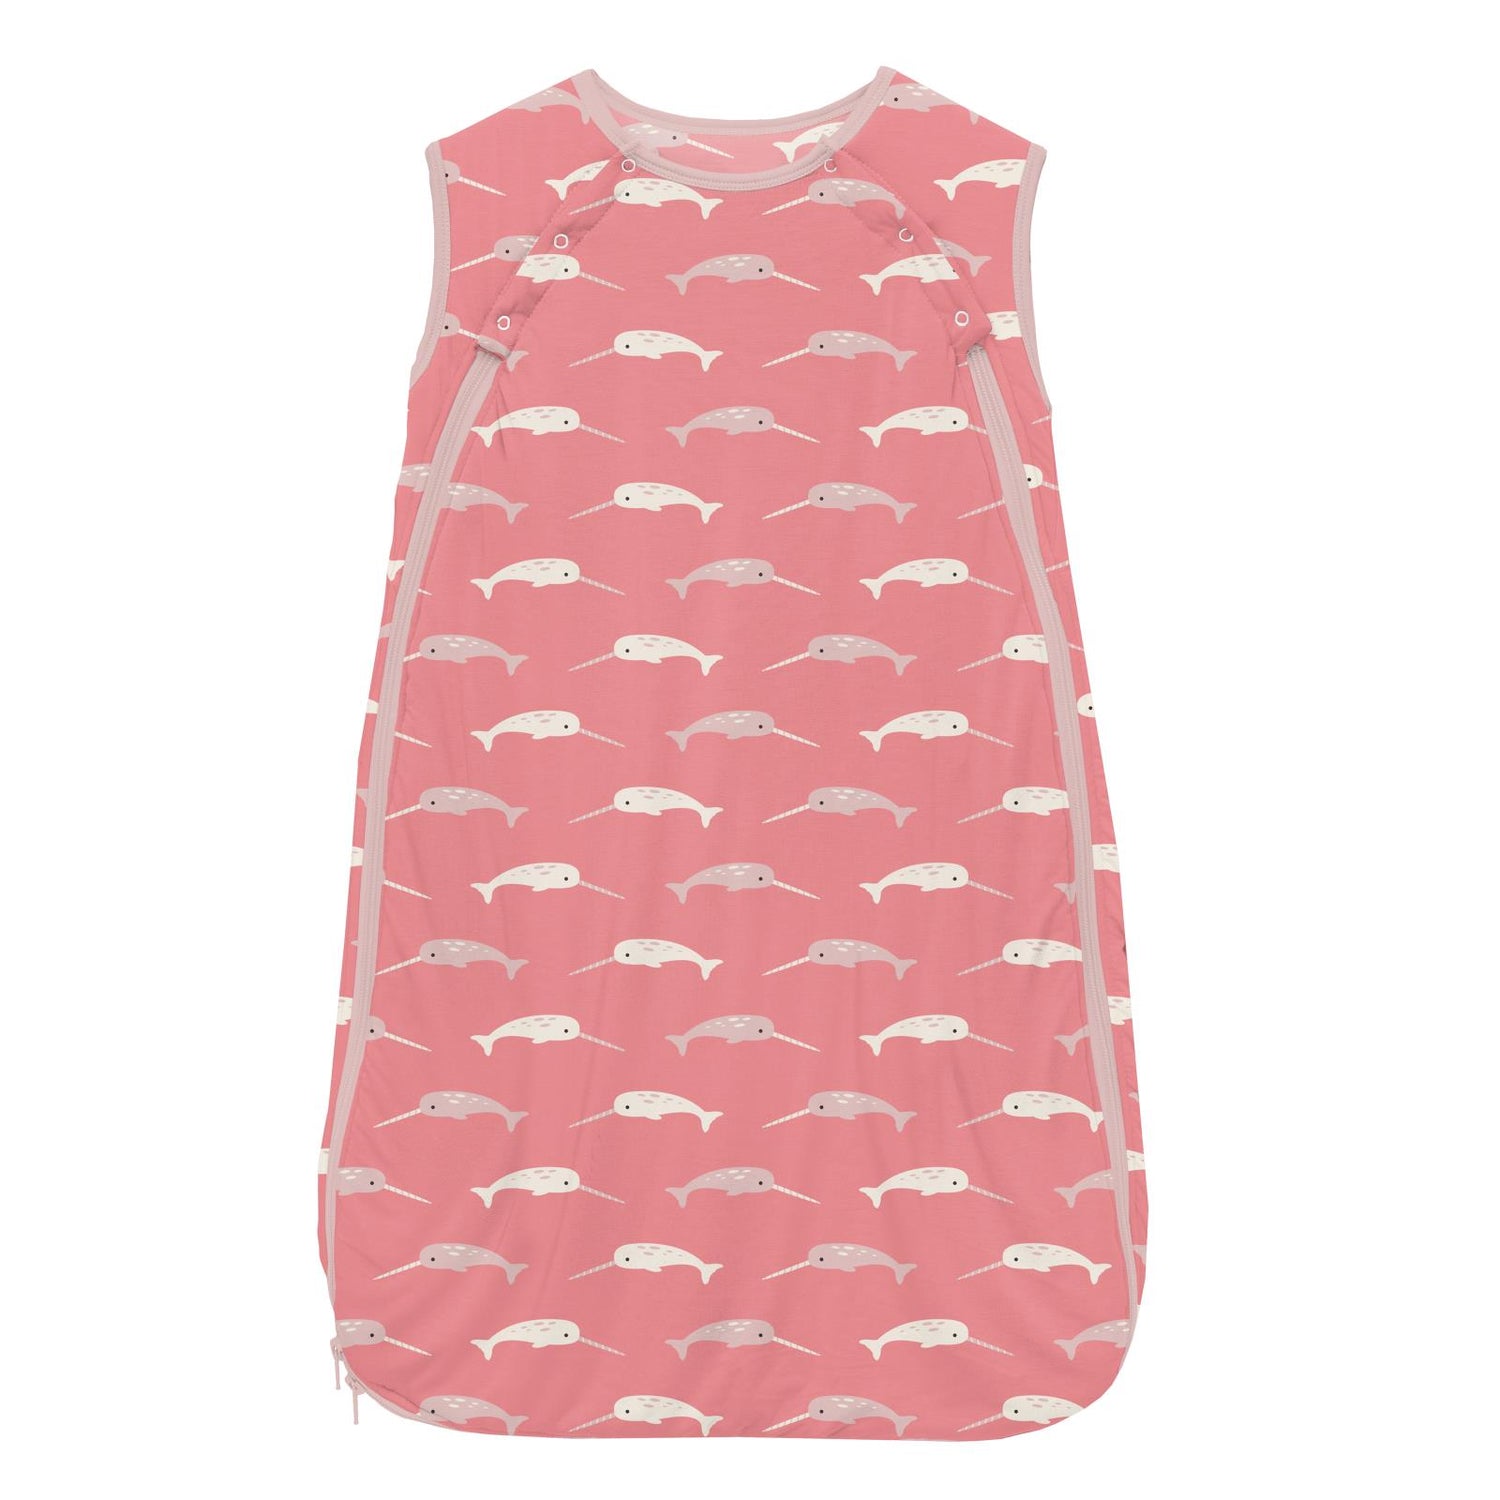 Print Fluffle Sleeping Bag in Strawberry Narwhal